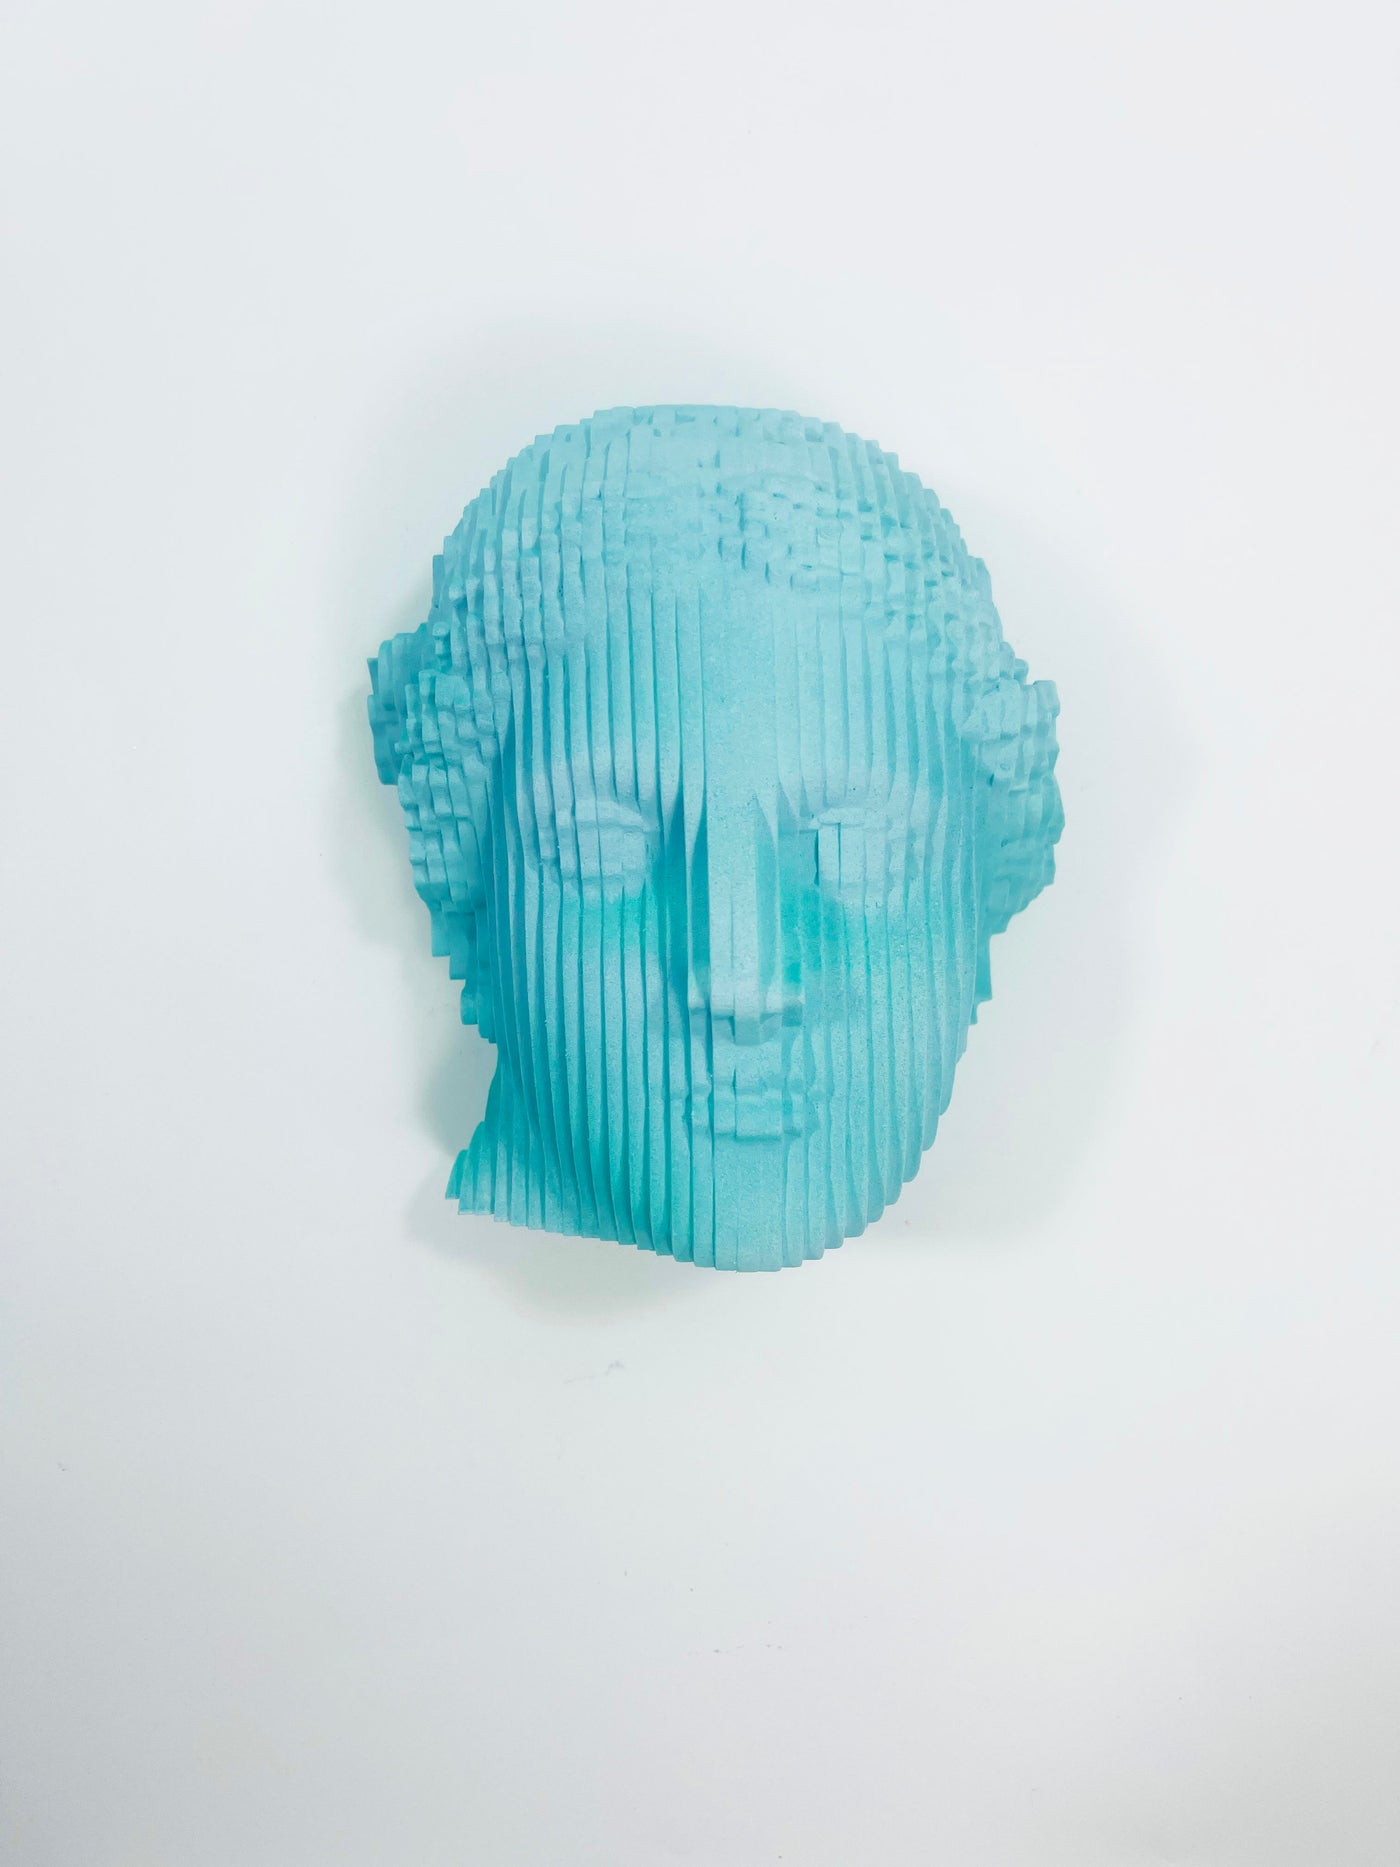 Venus on the Wall (Light Blue) by Daniele Fortuna - Unique Freestanding Sculpture - 2023